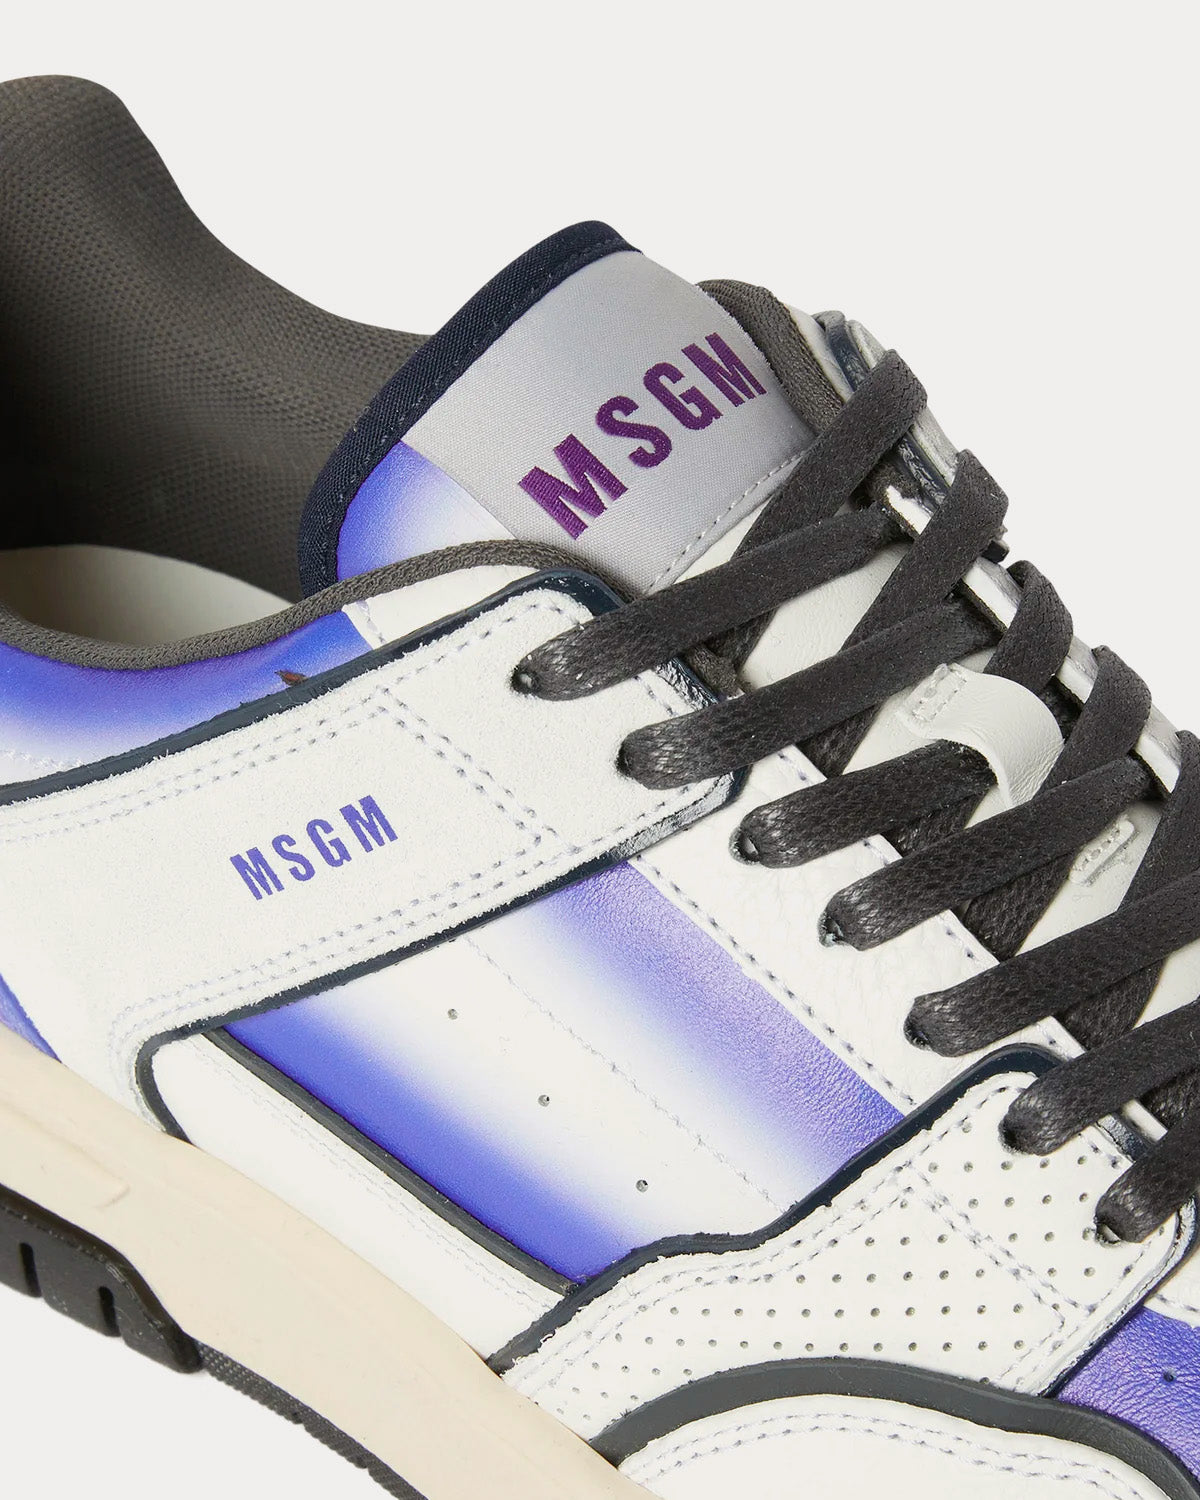 MSGM - Airbrush White / Blue Low Top Sneakers